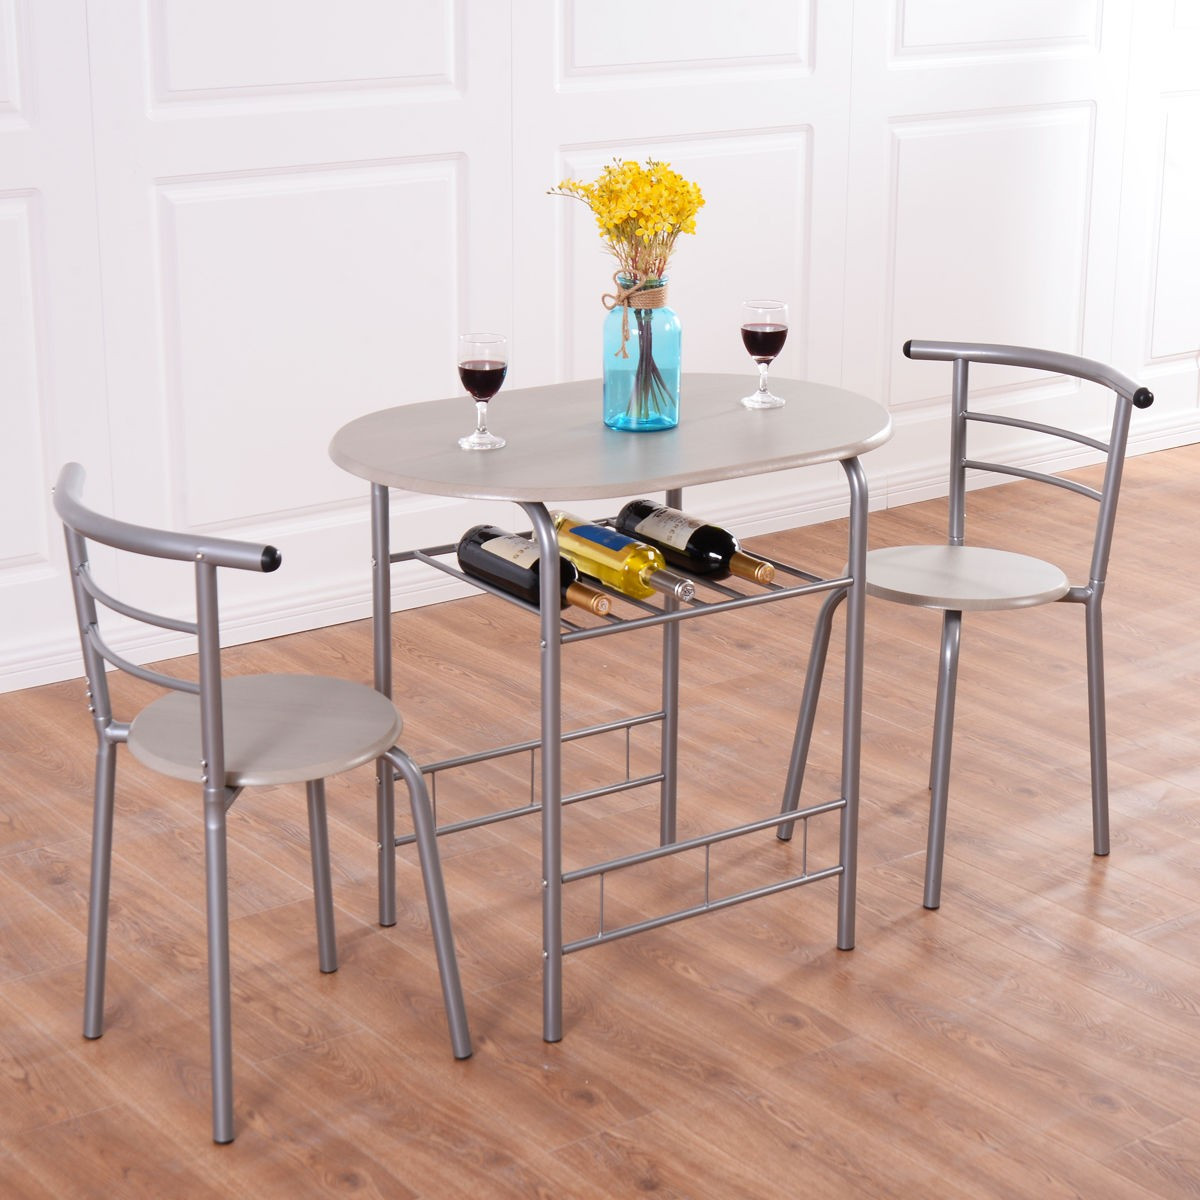 Small Kitchen Table And Chairs
 3pcs Bistro Dining Set Small Kitchen Indoor Outdoor Table